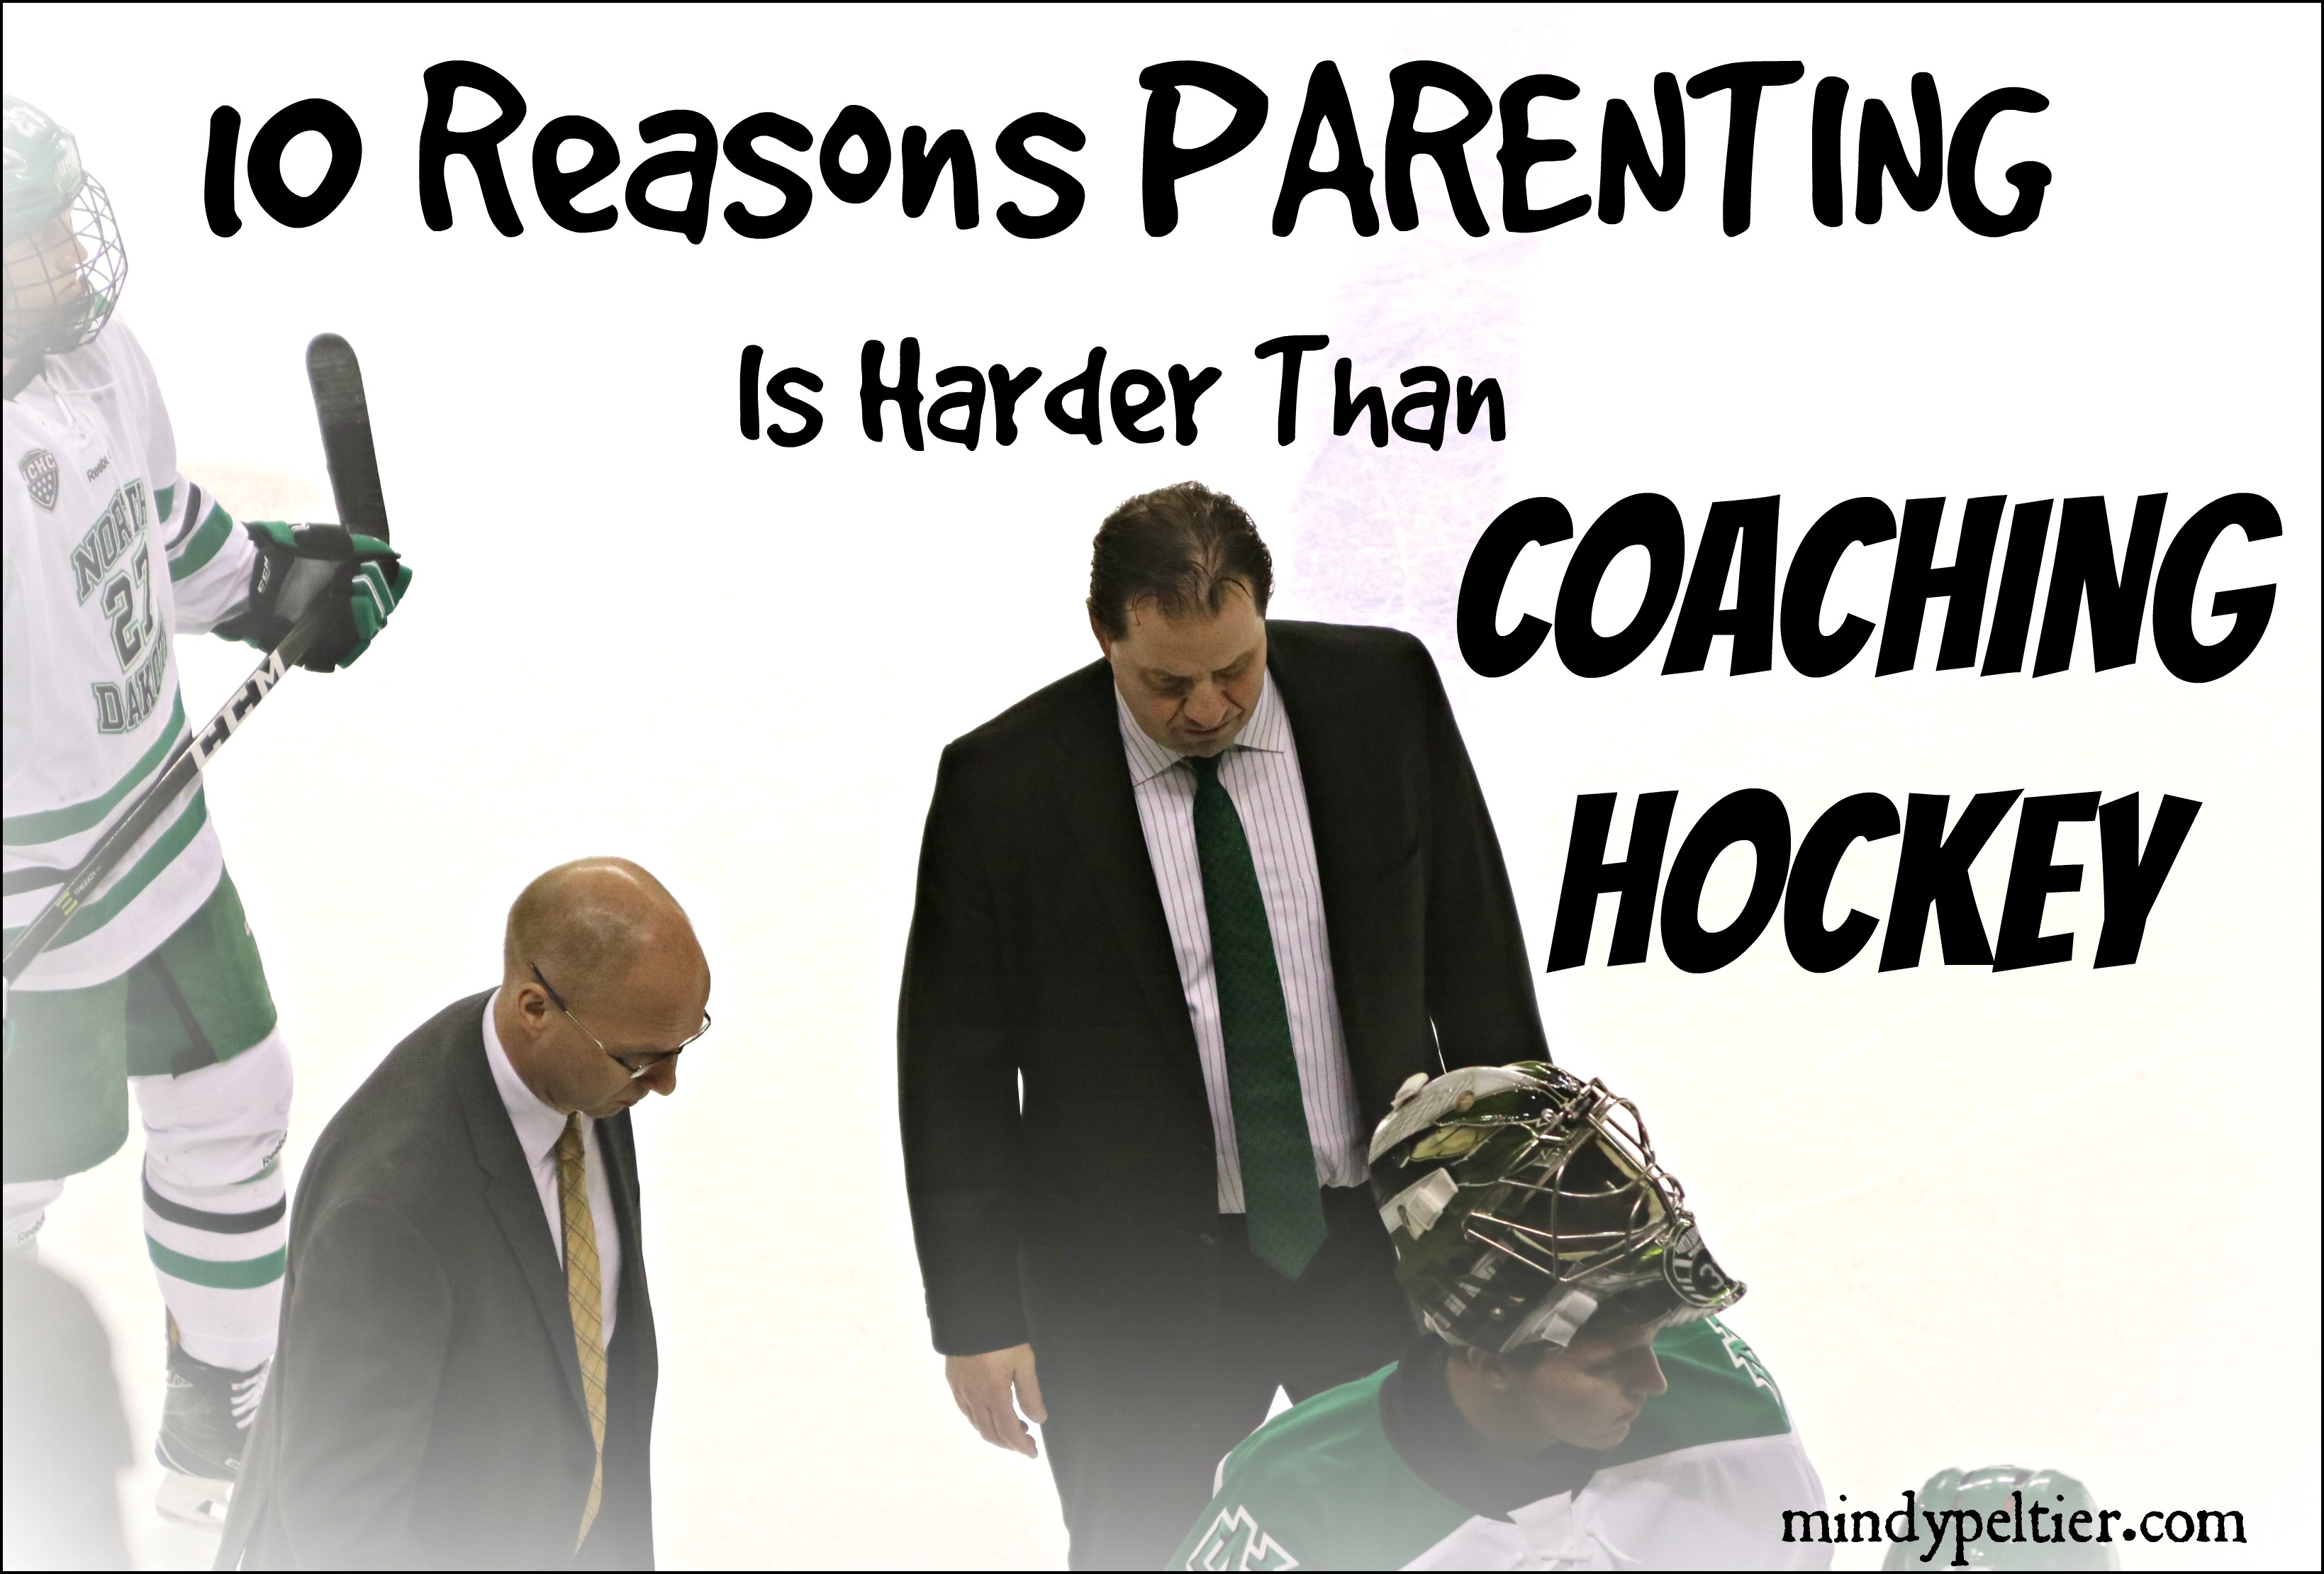 10 Reasons Parenting Is Harder than Coaching Hockey